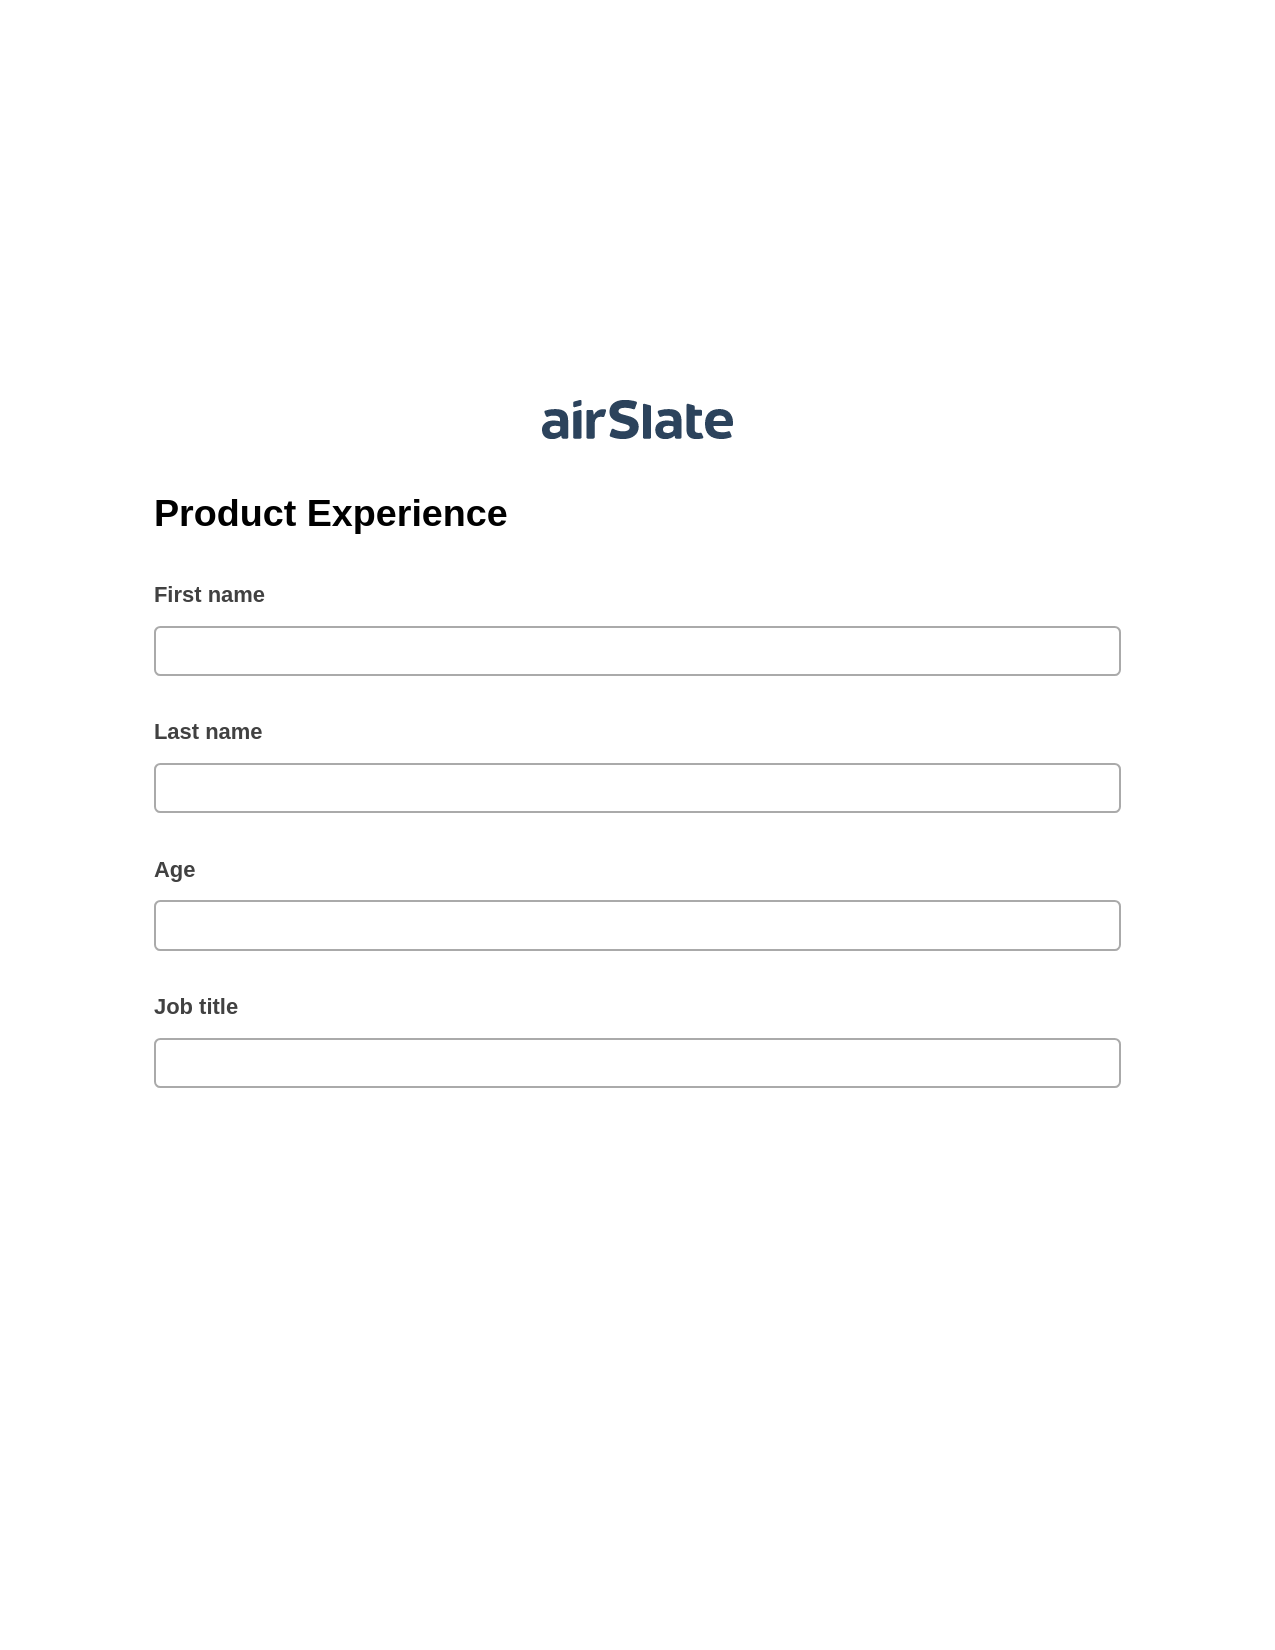 Product Experience Pre-fill from Excel Spreadsheet Bot, Assign Roles to Recipients Bot, Export to Excel 365 Bot